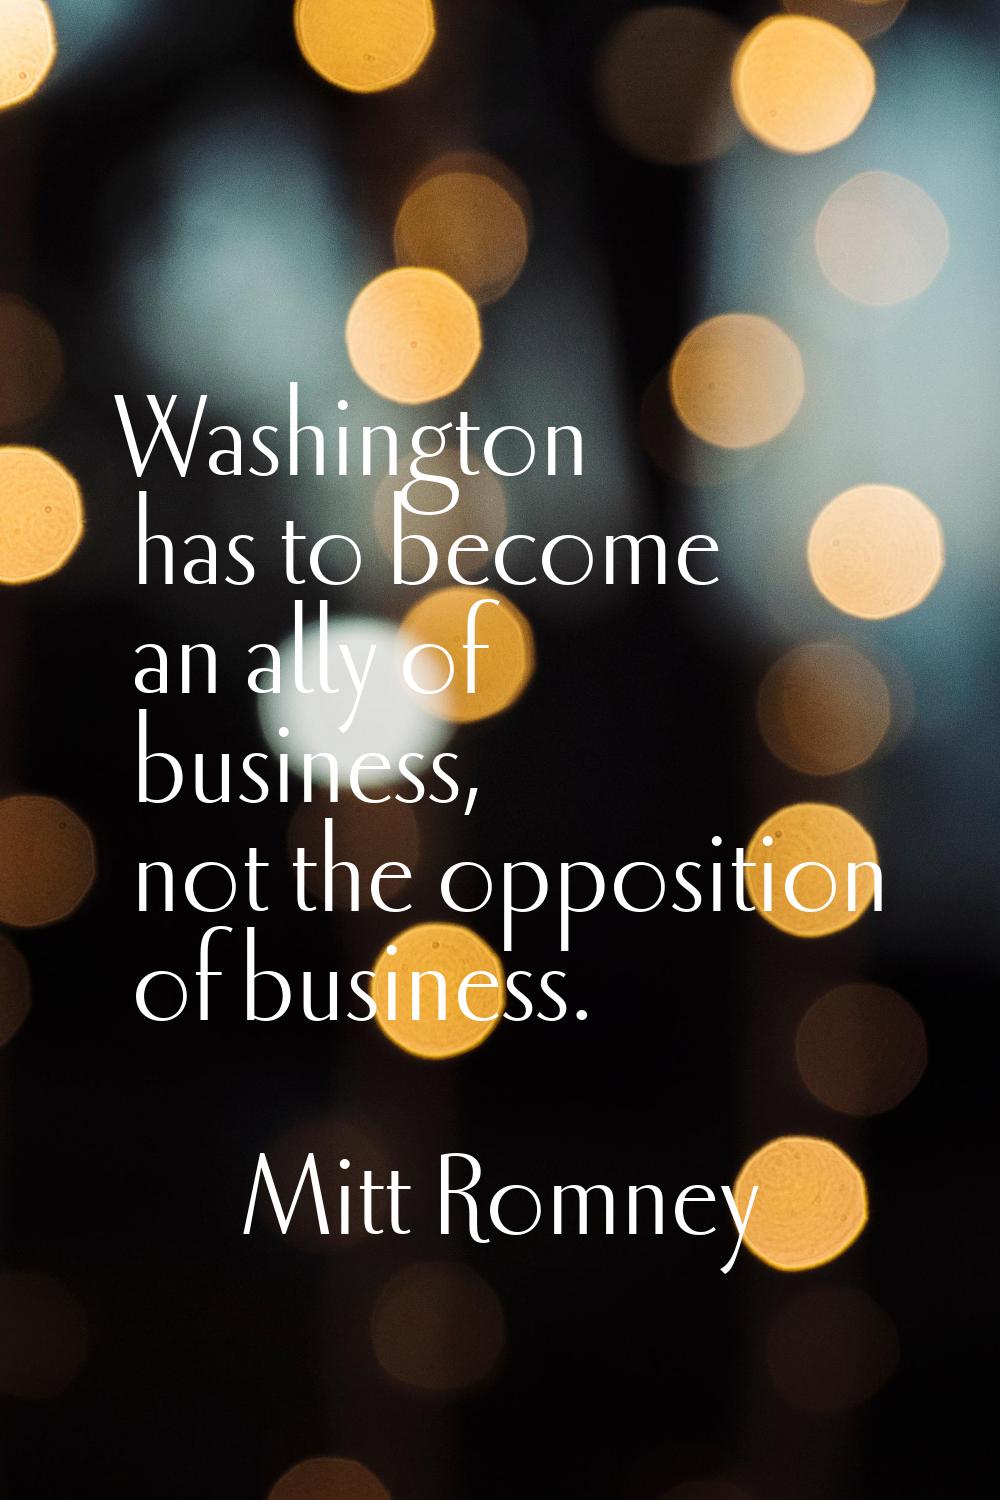 Washington has to become an ally of business, not the opposition of business.